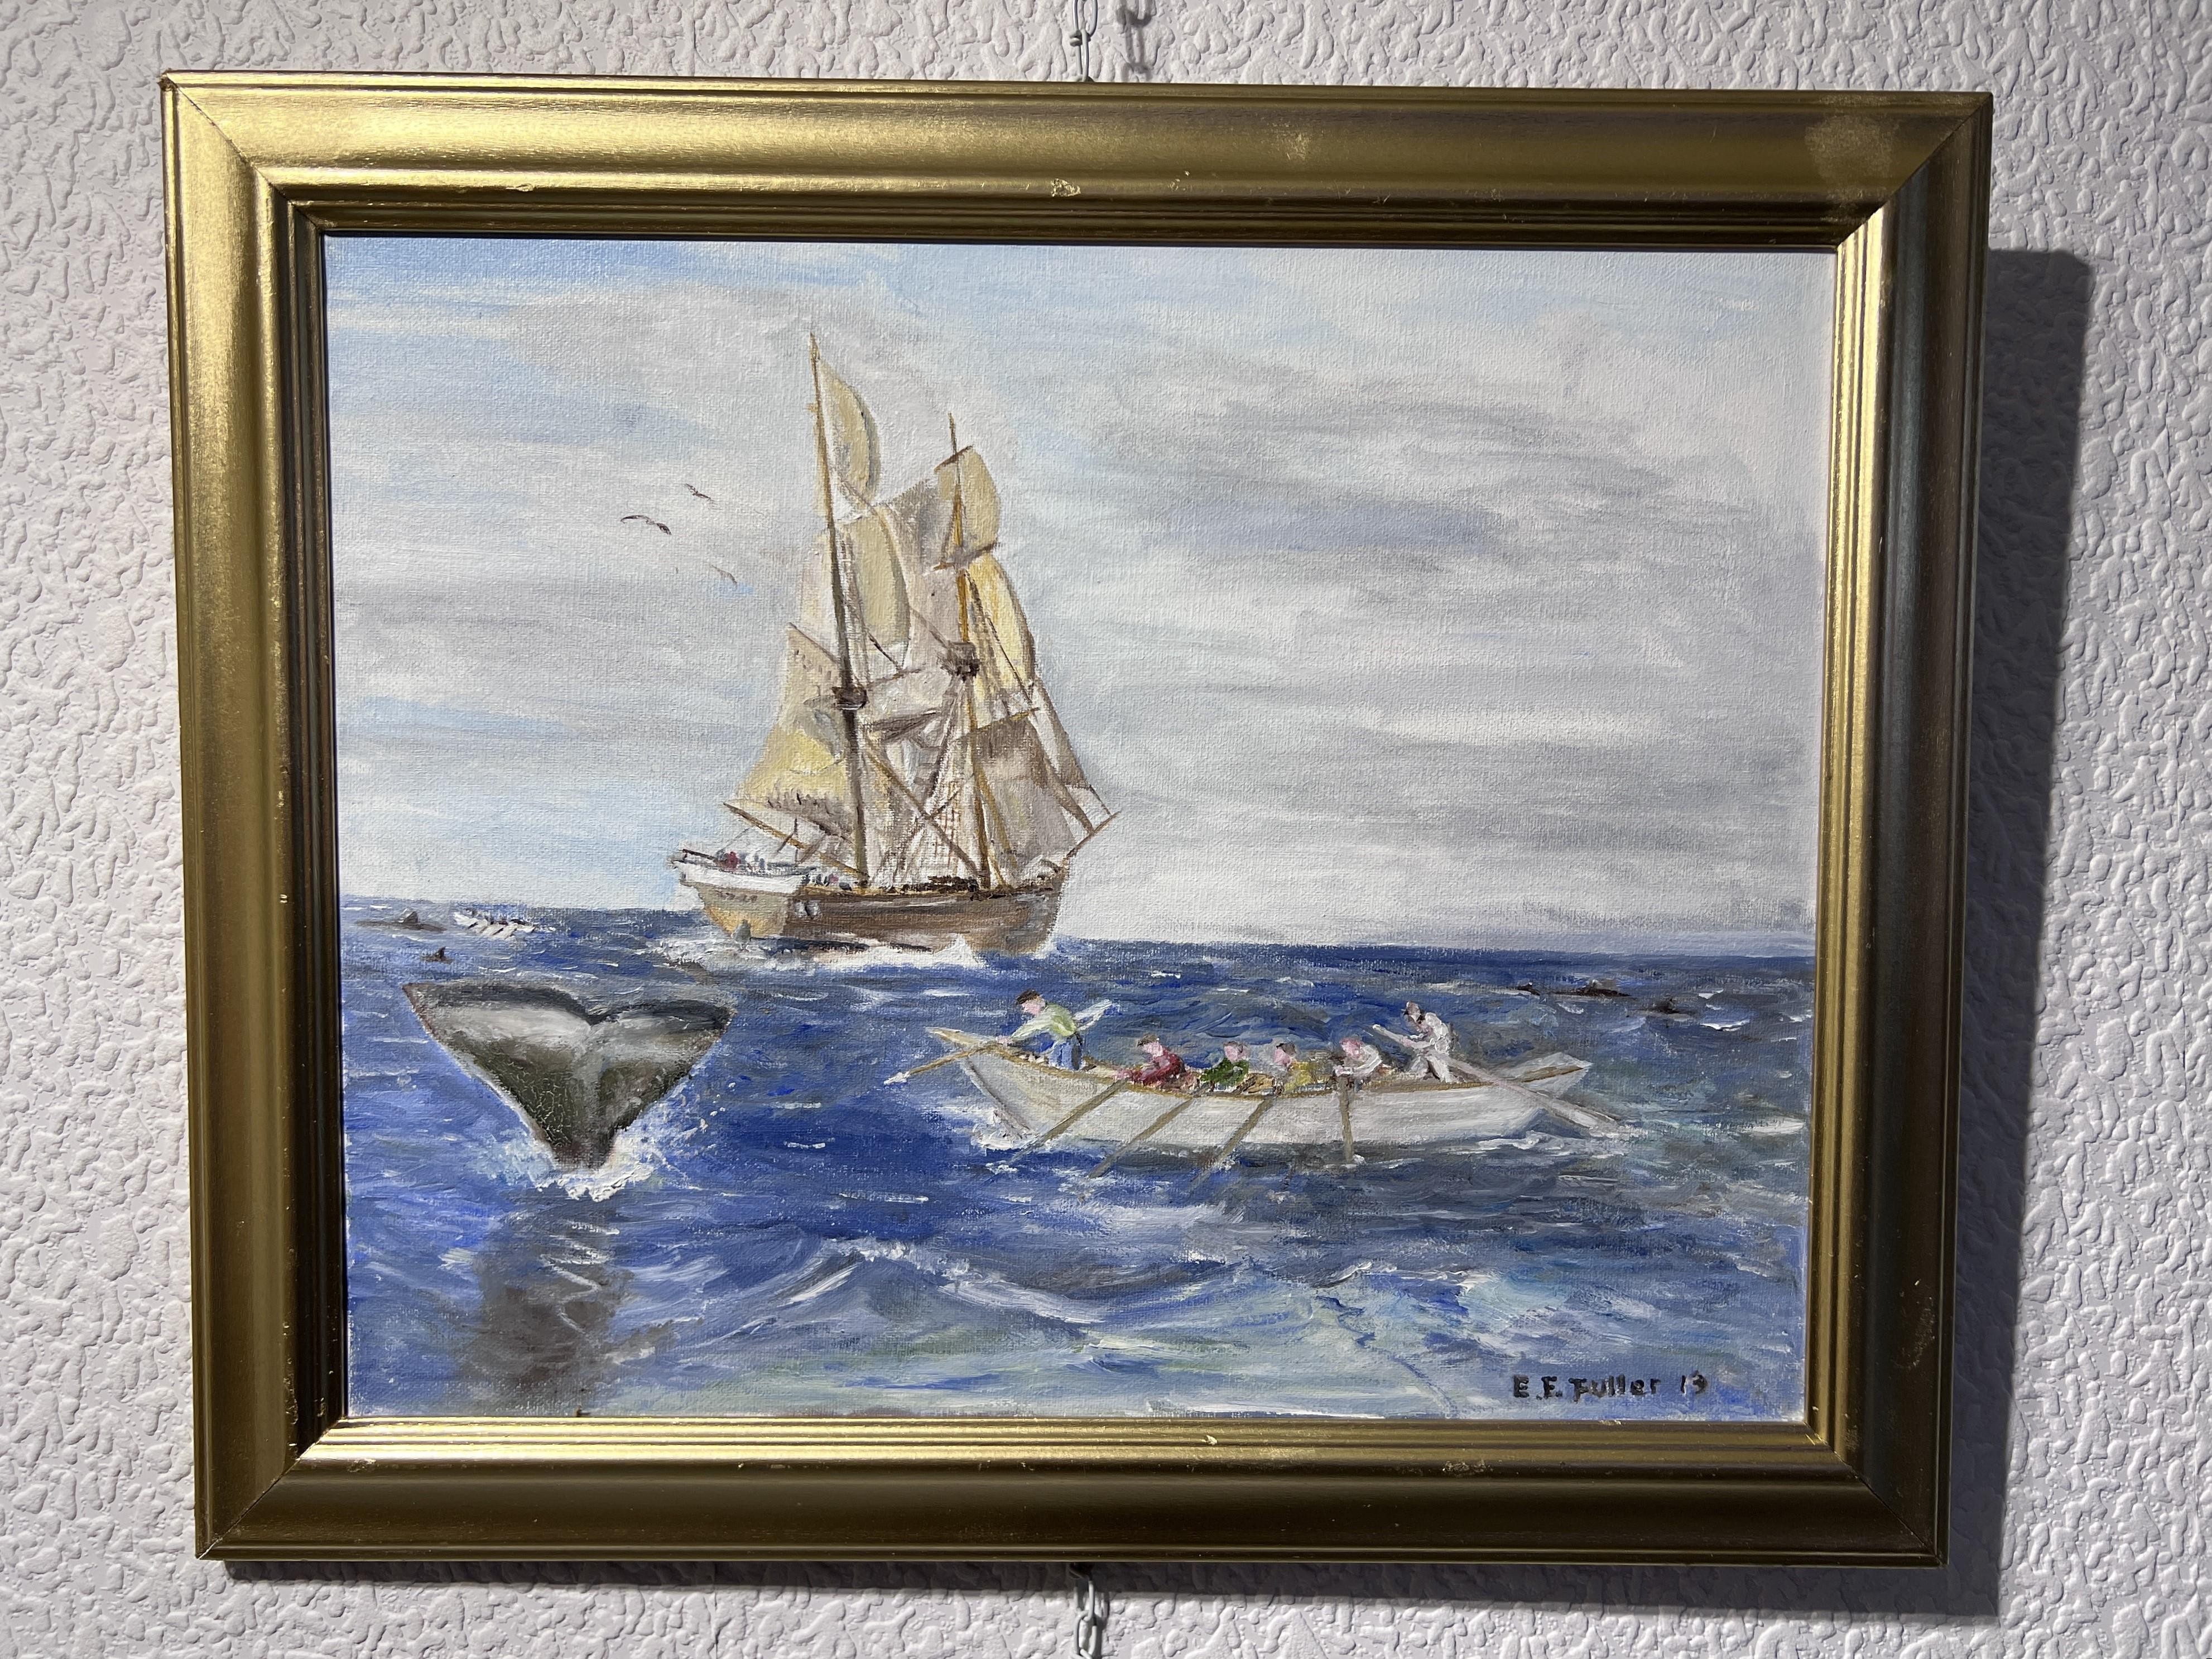 Artist E.F. Fuller Original Painting on canvas, Seascape, Sailboat. Dated For Sale 1